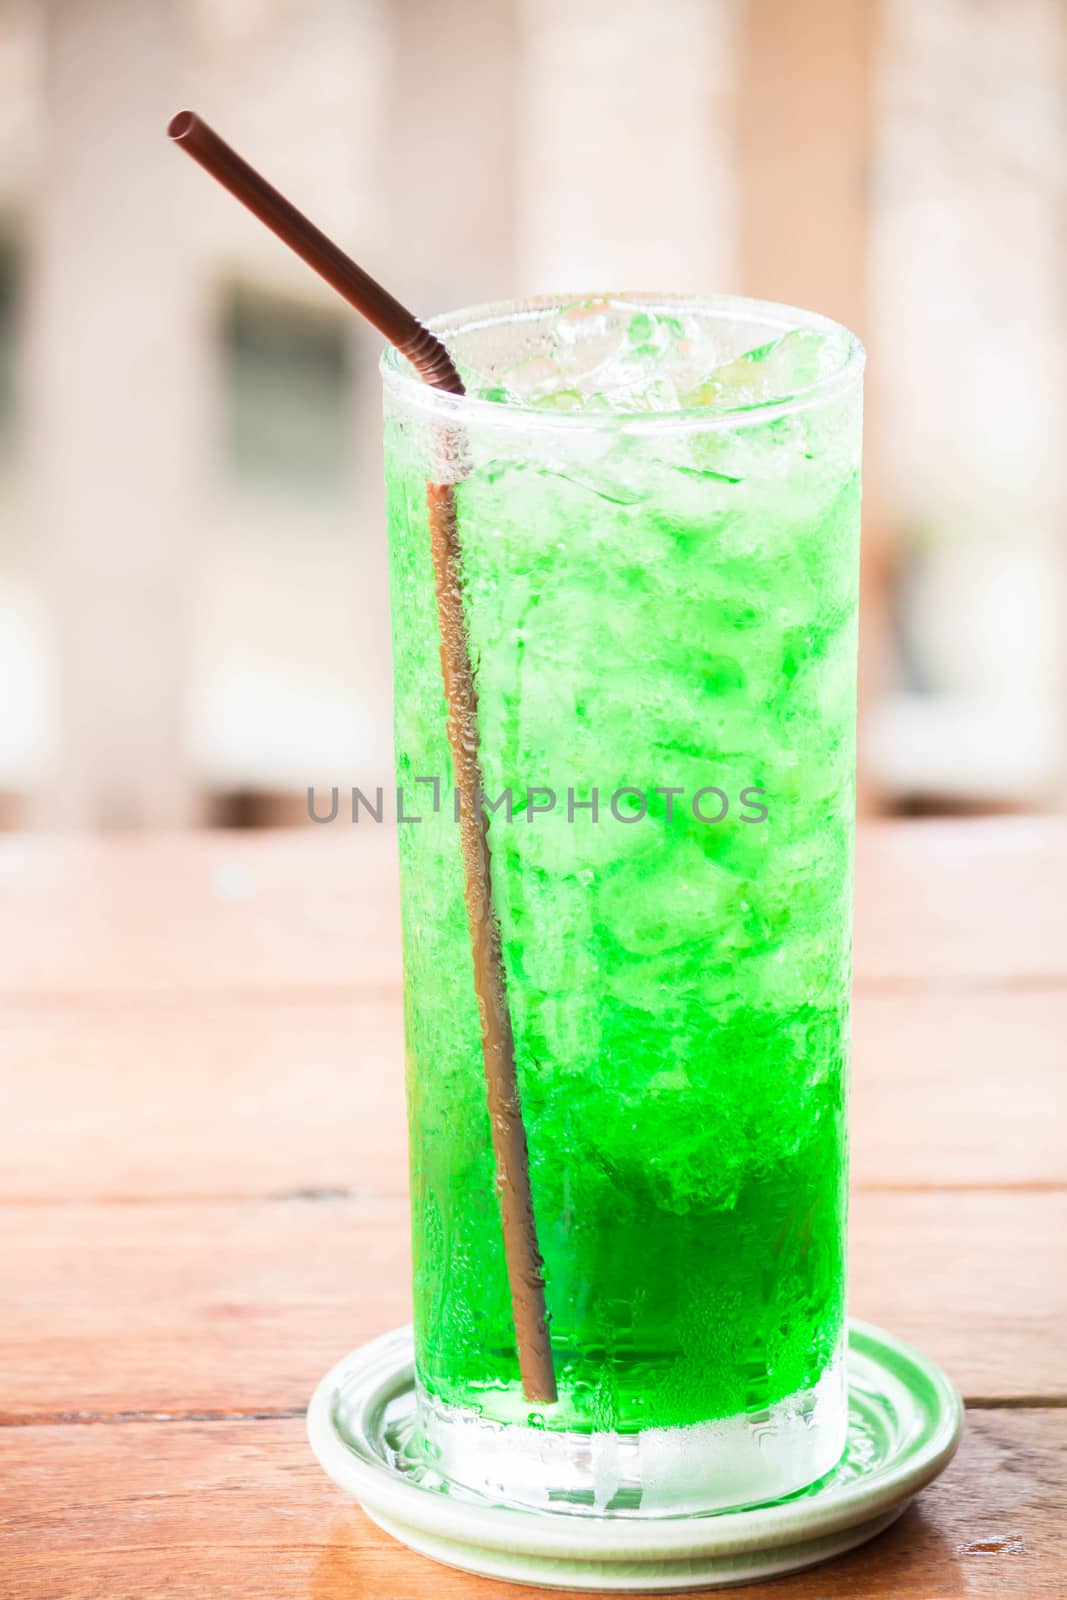 Relaxing with iced green drink on table